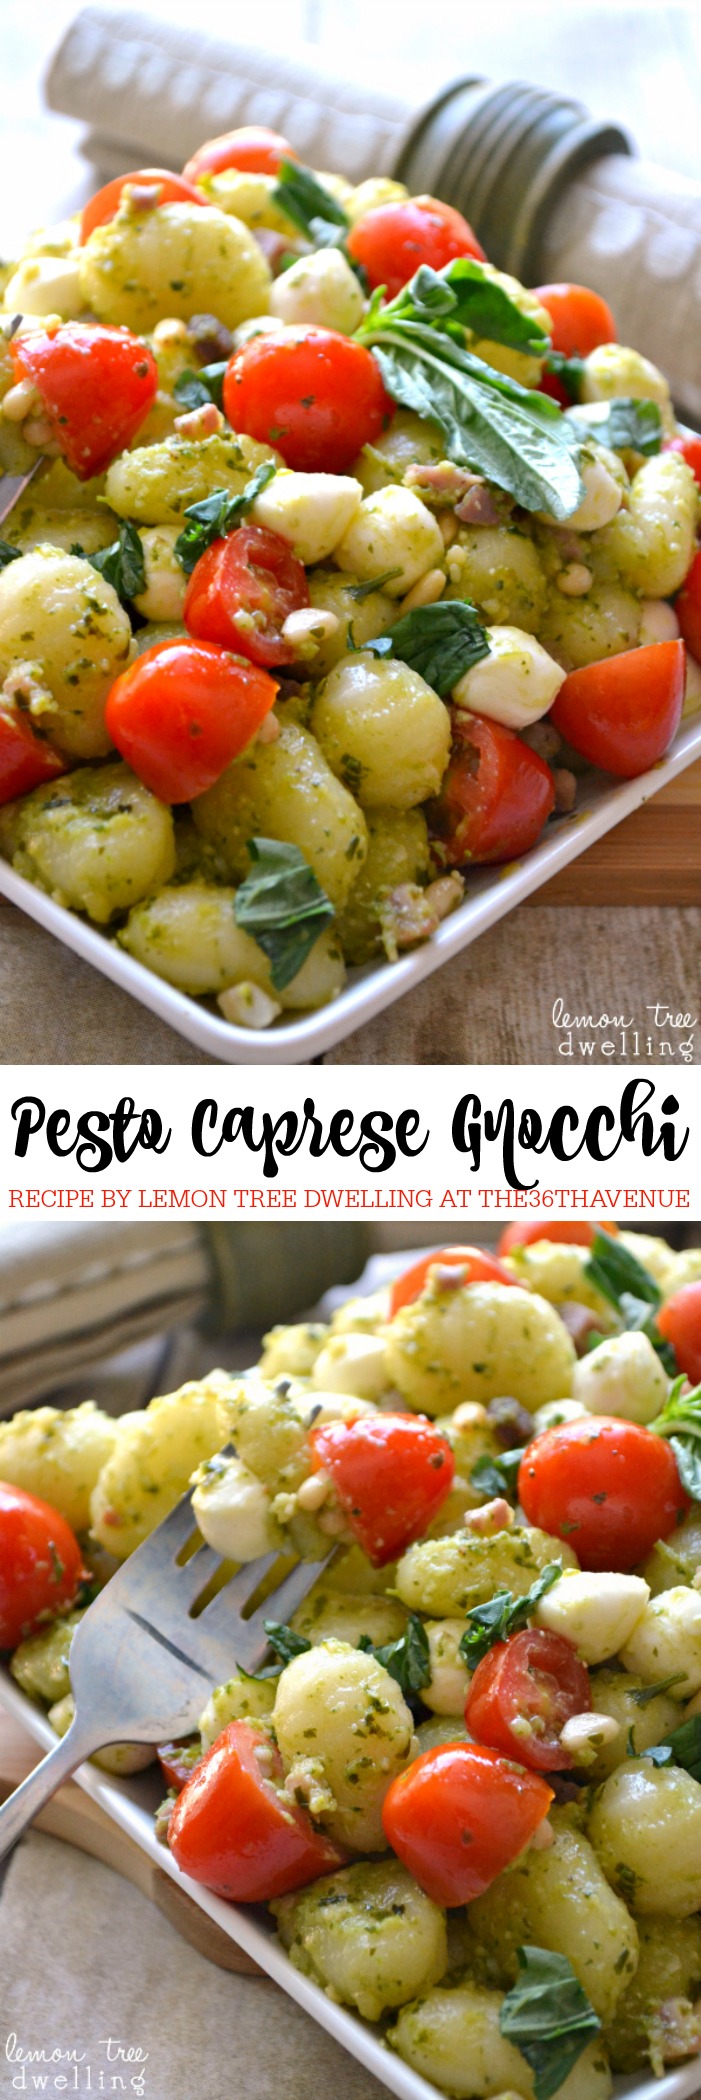 Side Dish Recipe - This Pesto Caprese Gnocchi is perfect to serve as a side dish or appetizer. The ingredient combination is brilliant and delicious! PIN IT NOW and make it later!